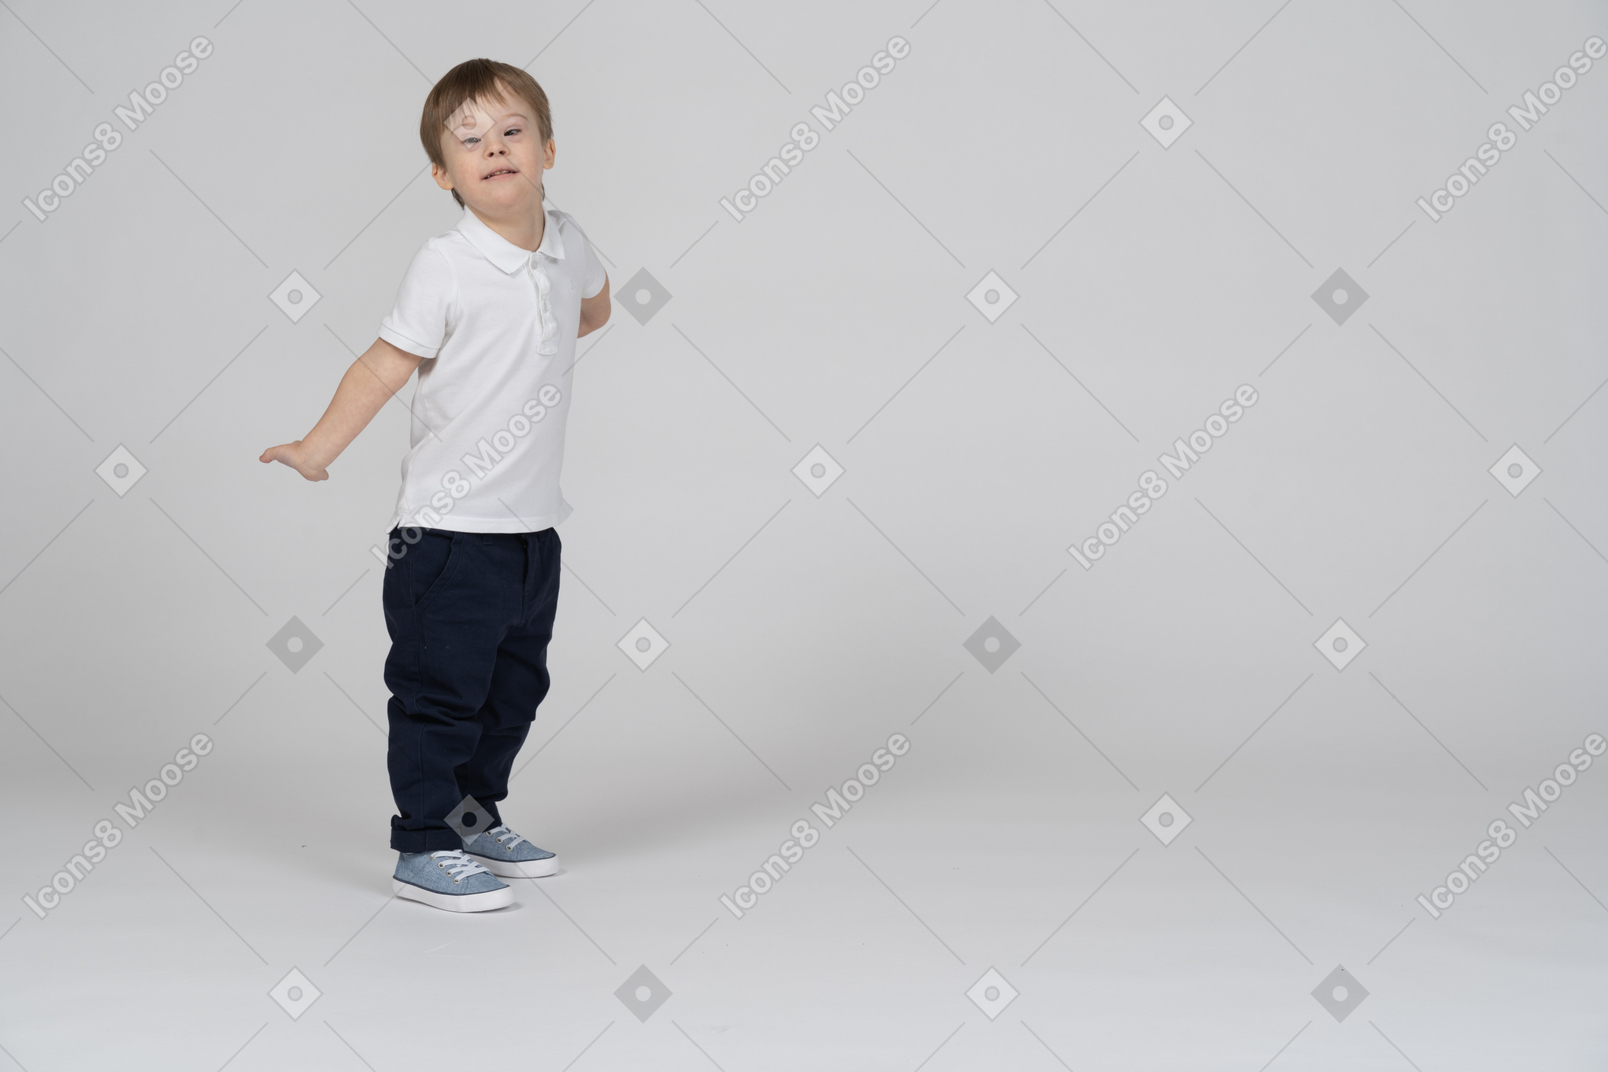 Little boy standing and stretching his arms